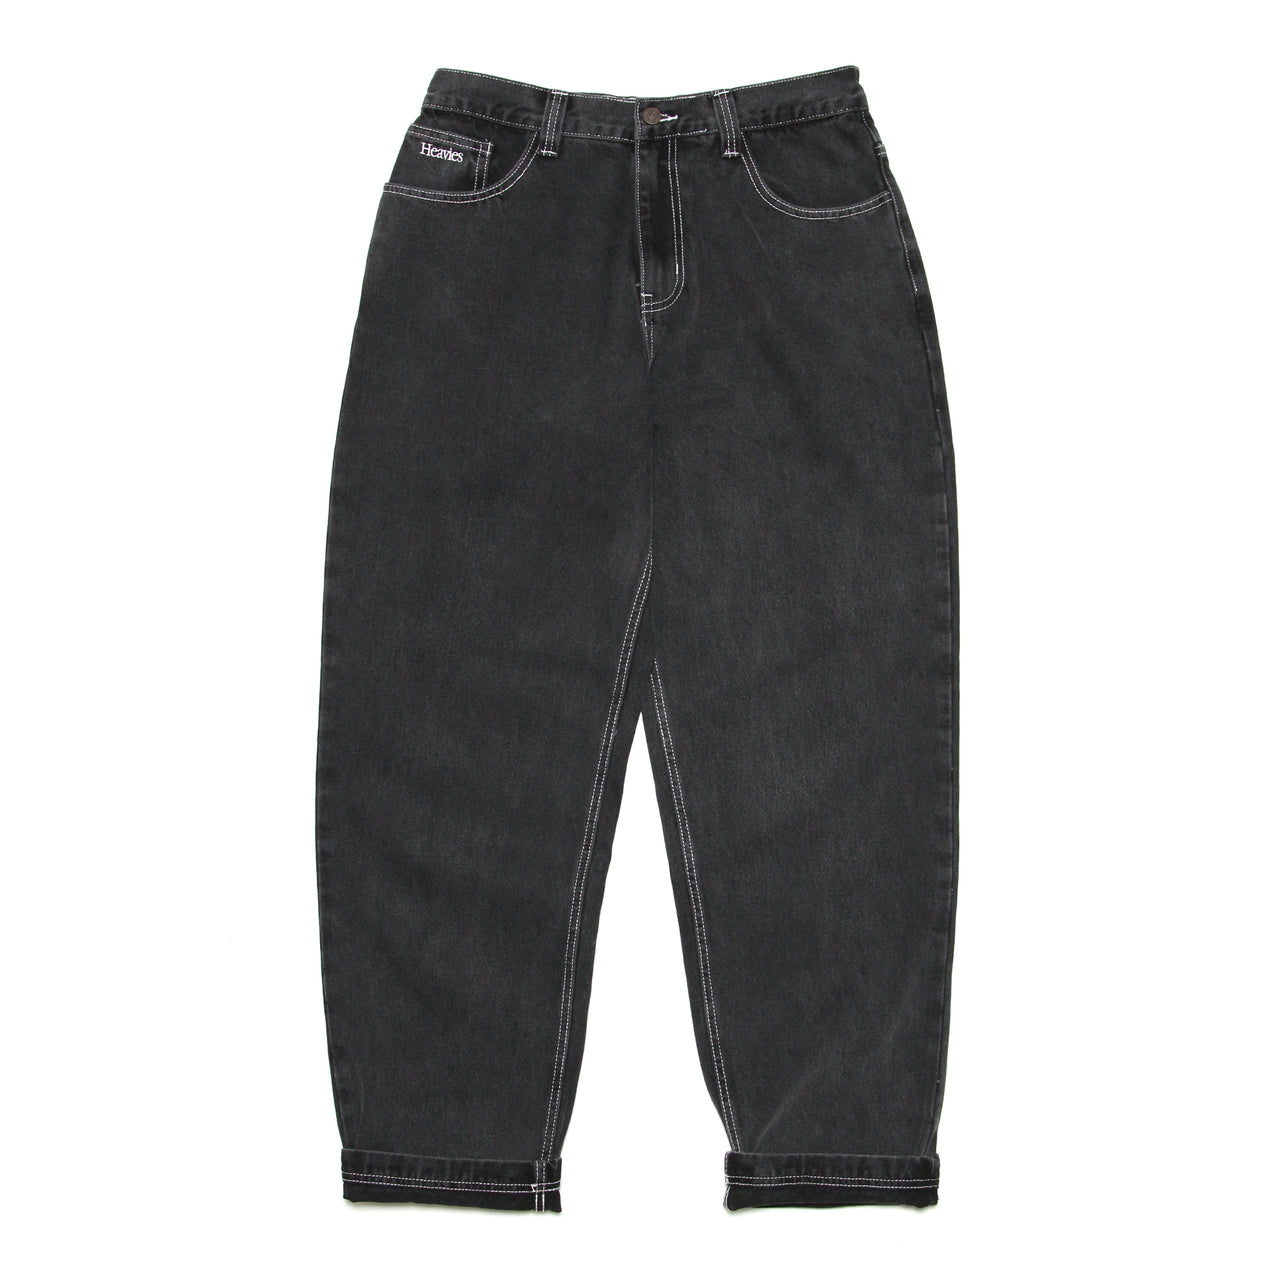 Heavies 03 Jeans - Washed Black/Contrast Stitching